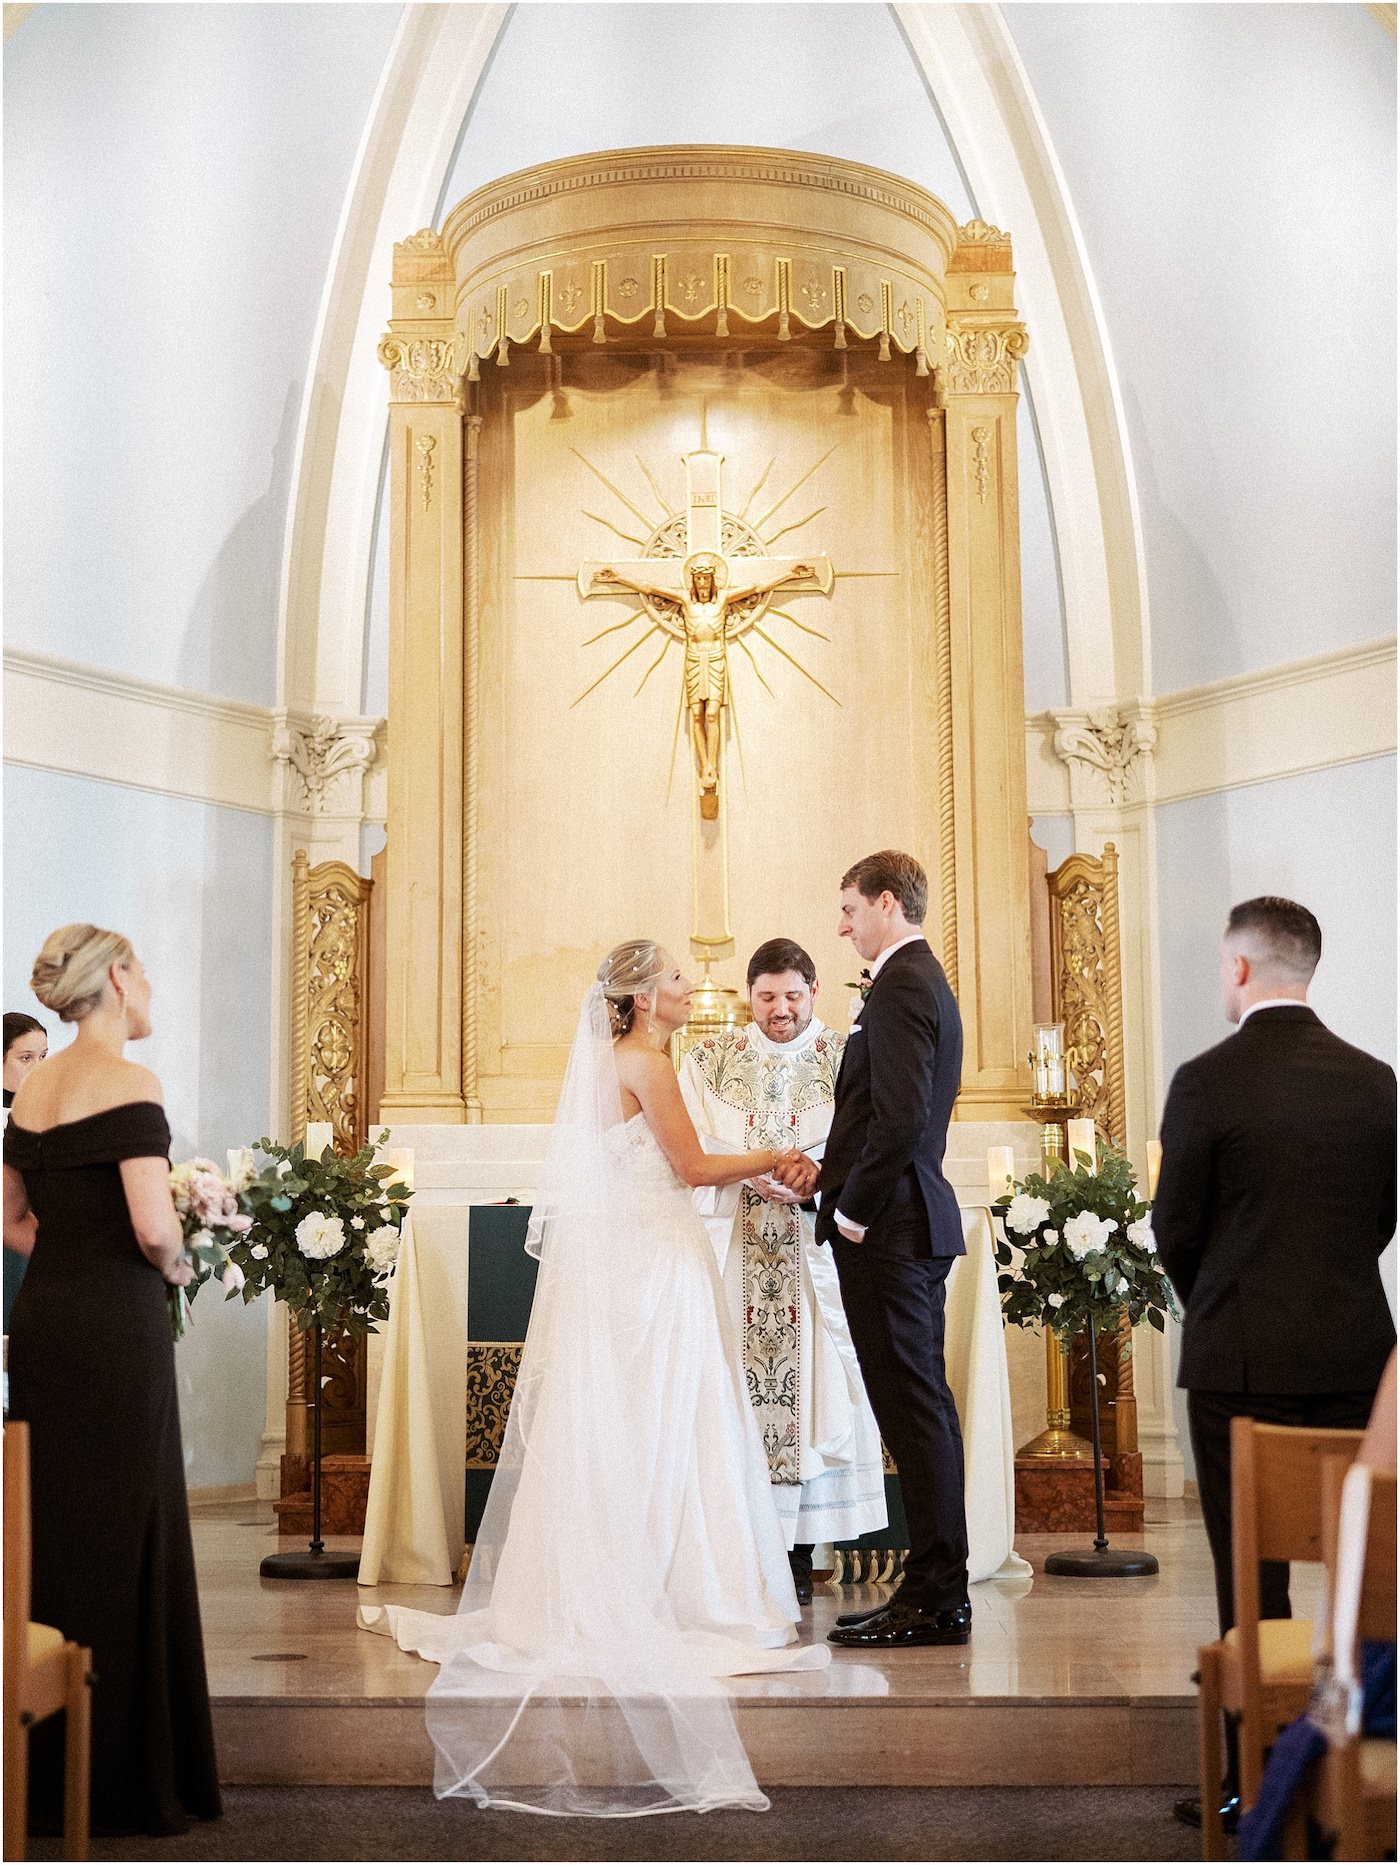 Bride and Groom Exchanging Vows during Religious Ceremony | Traditional Tampa Wedding Ceremony at Academy of Holy Names Chapel